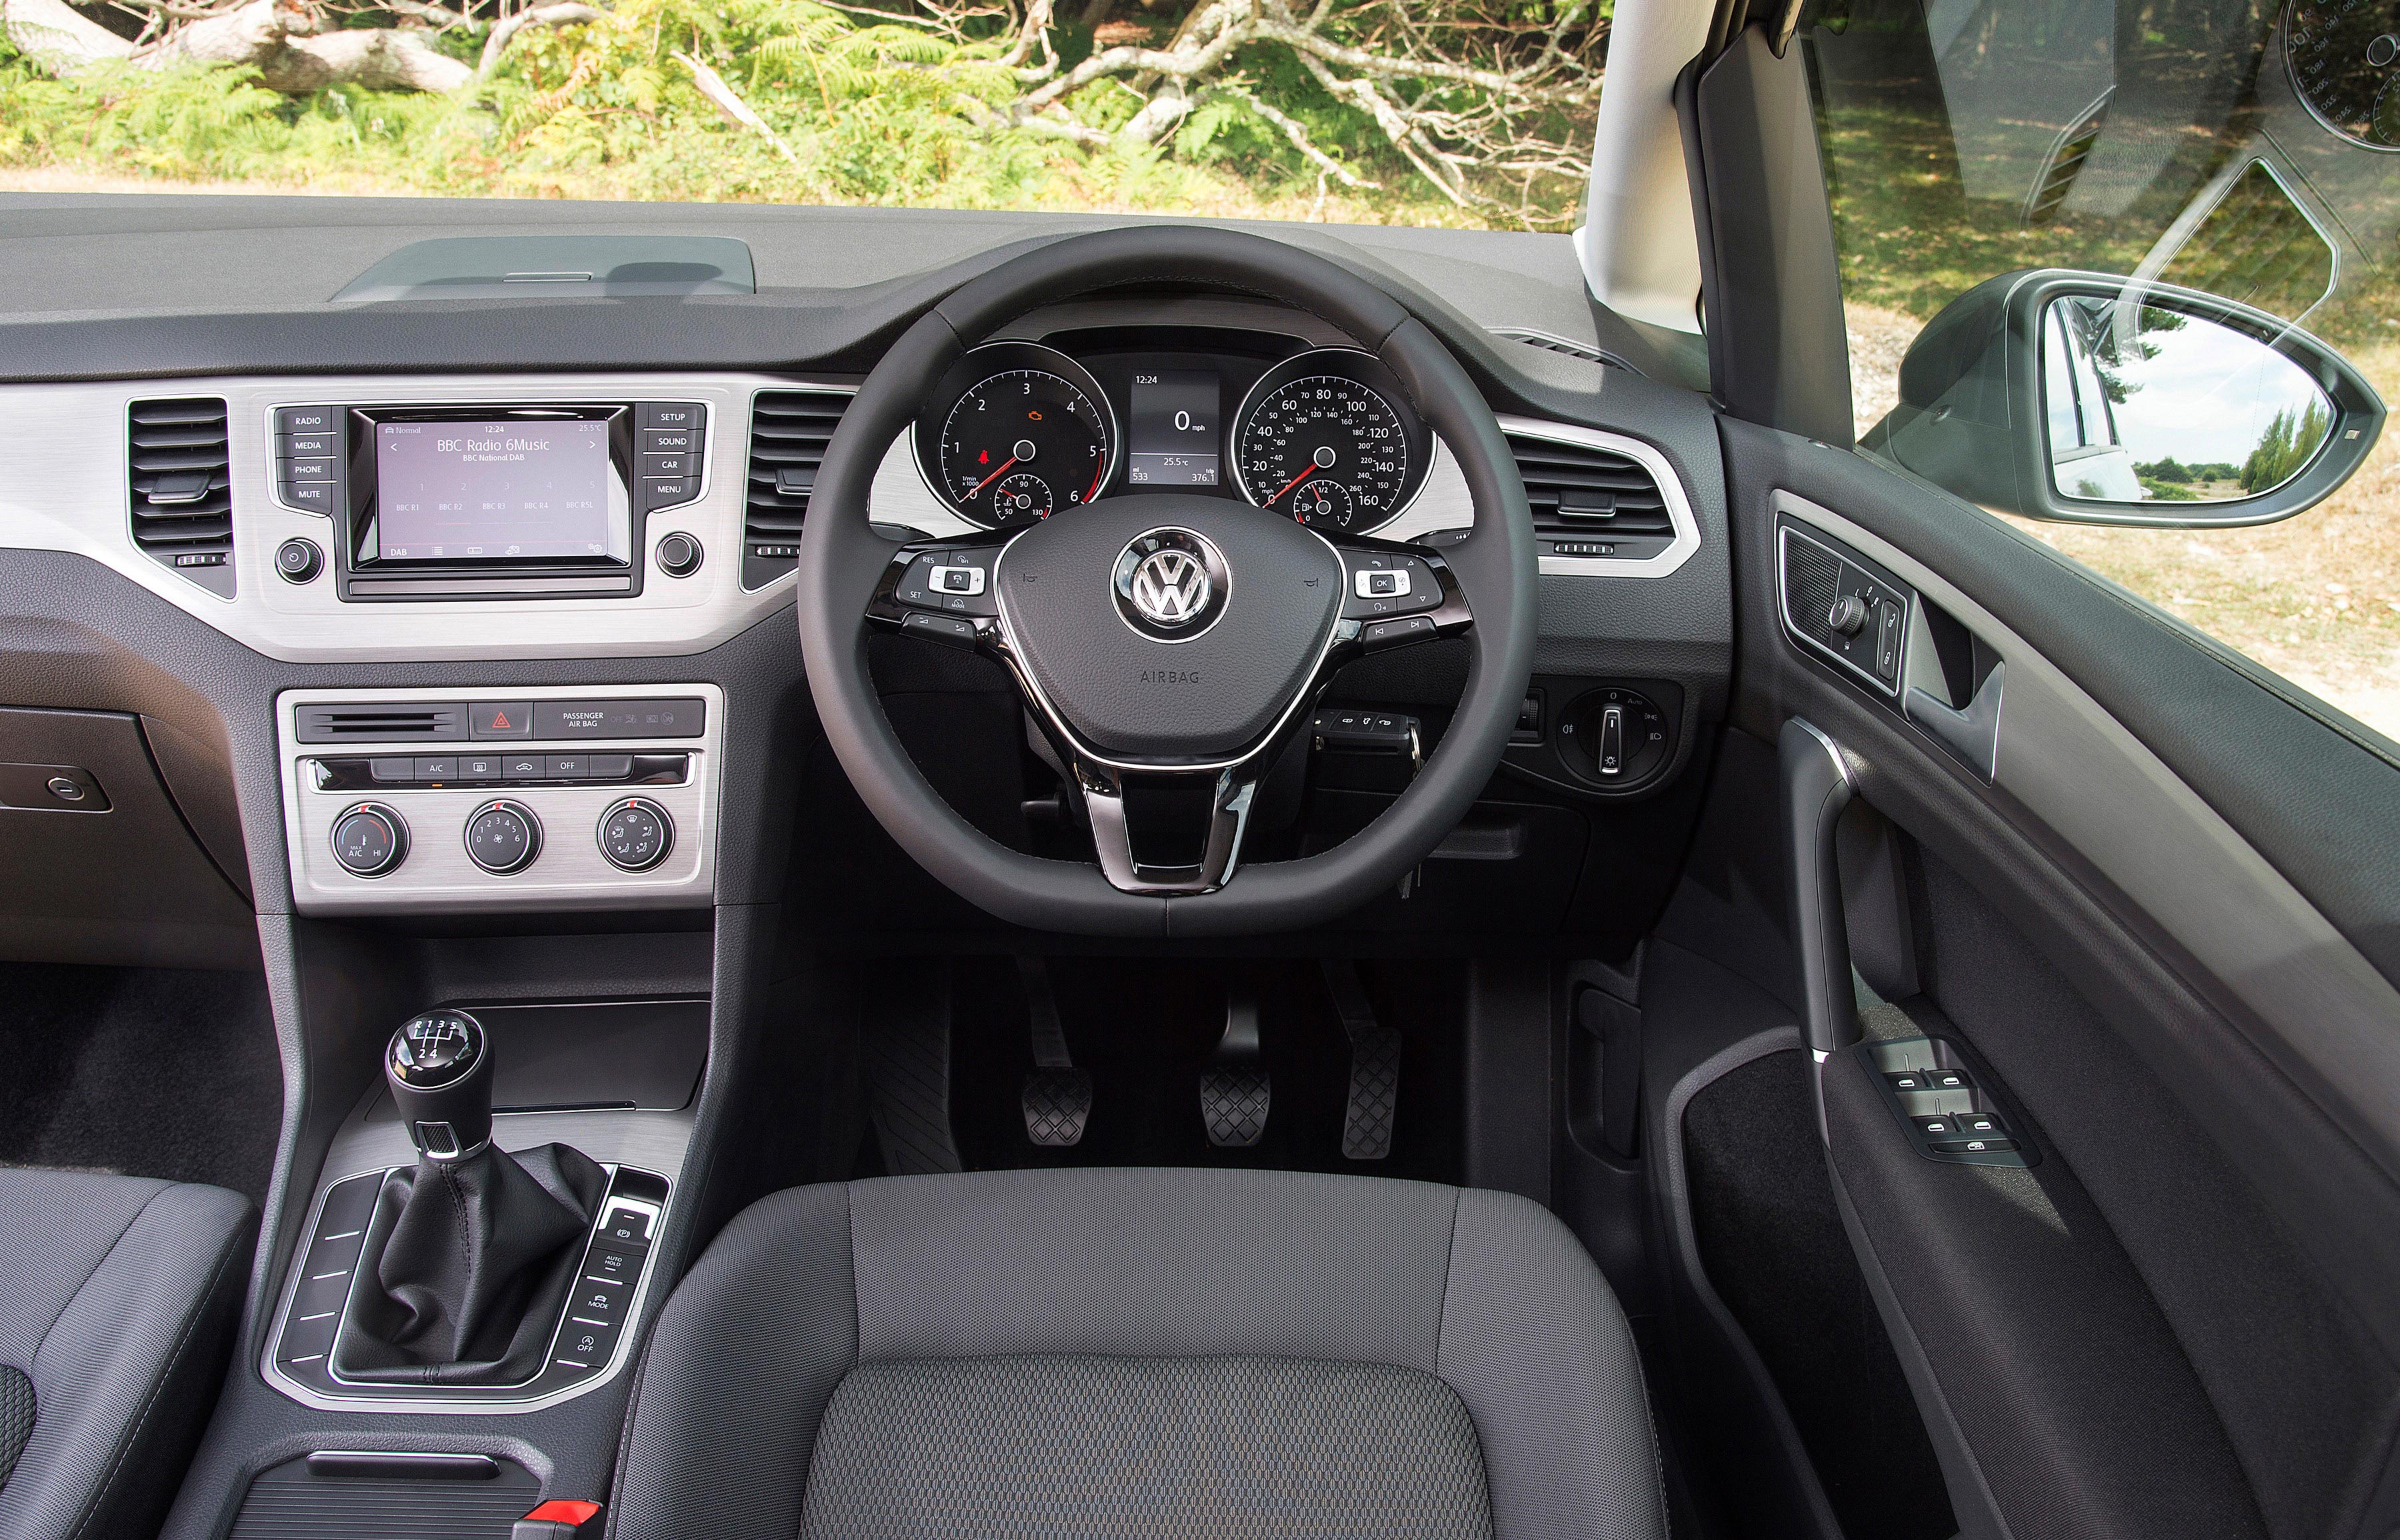 The SV's dashboard is virtually identical to what you'll find in the standard Golf